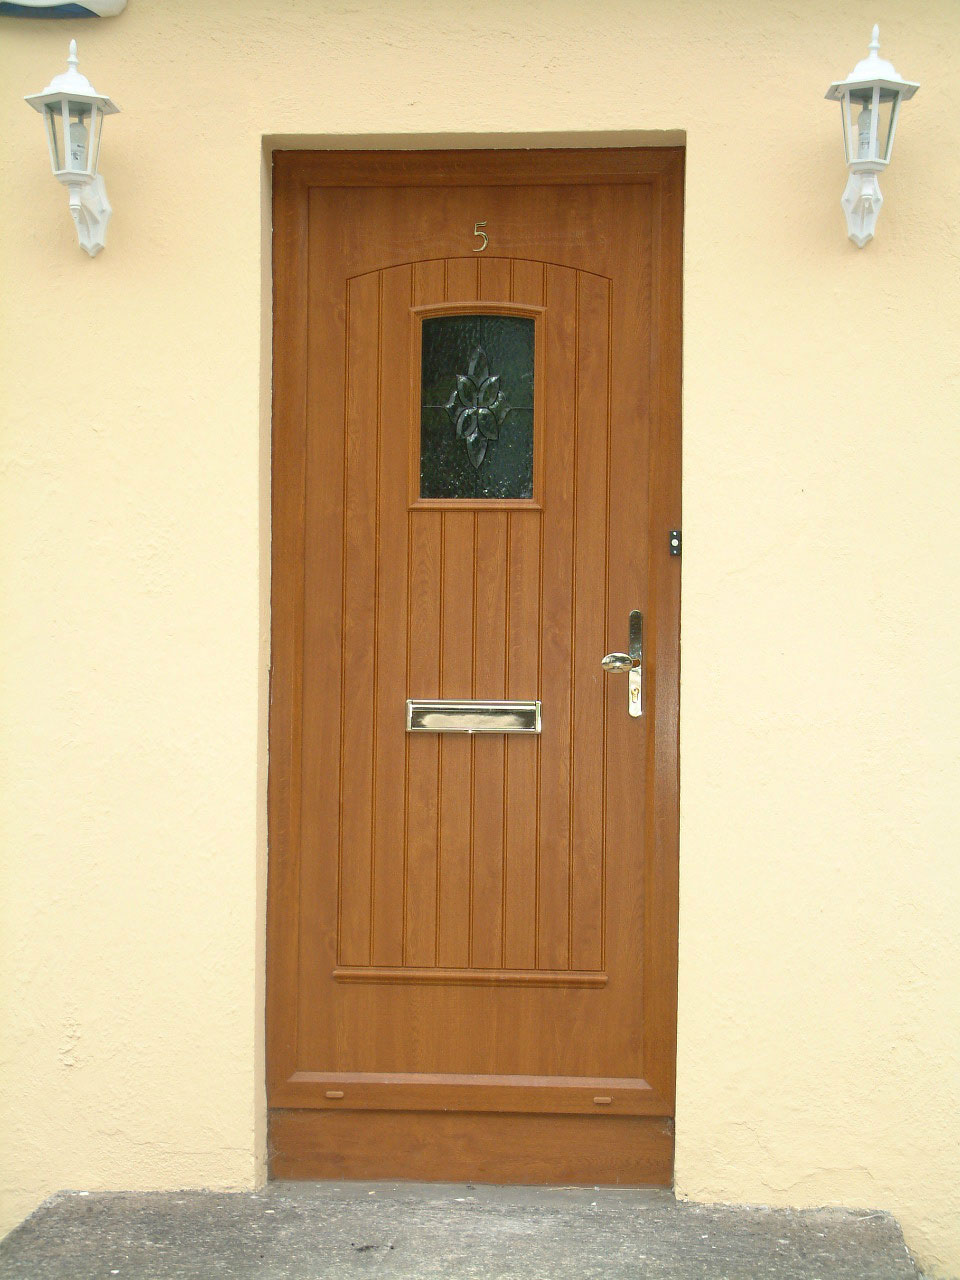 OAK PALLADIO T&G COMPOSITE FRONT DOOR FITTED BY ASGARD WINDOWS IN DUBLIN 20.